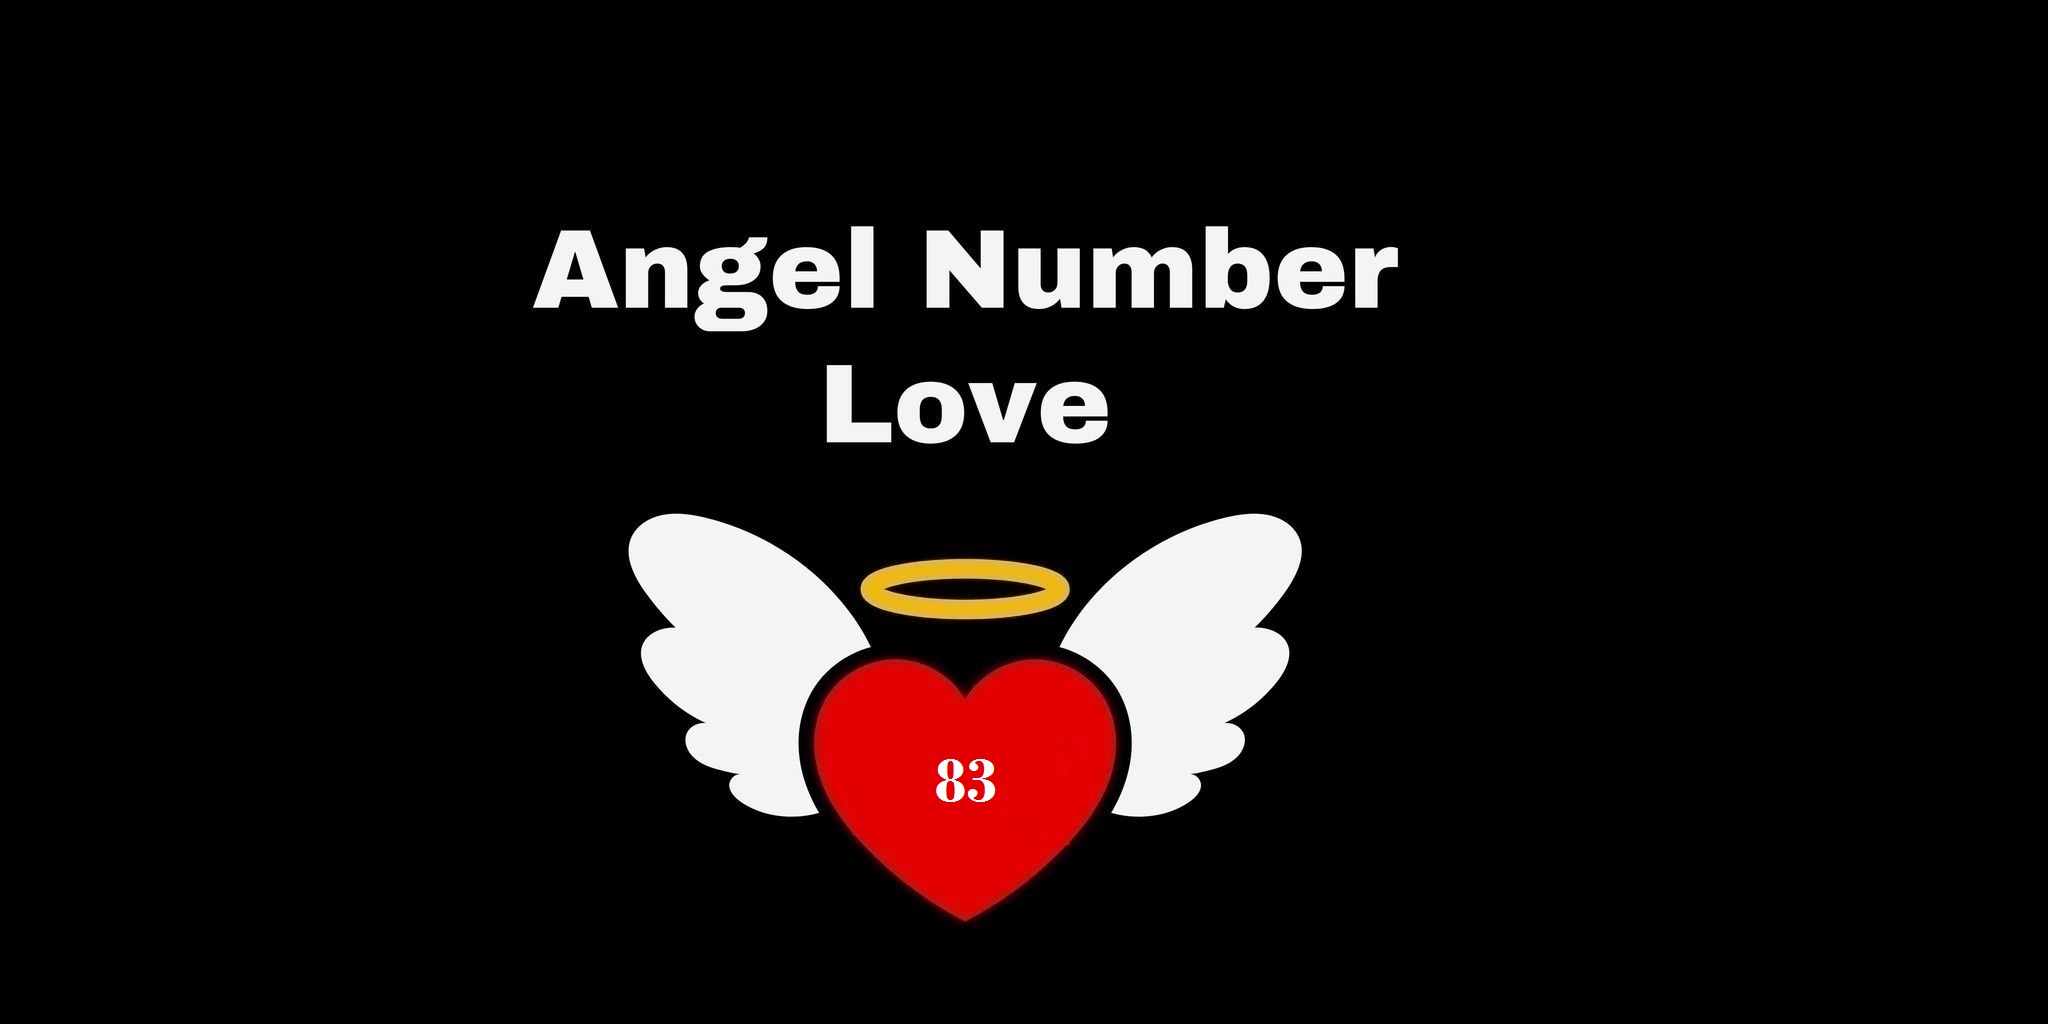 83 Angel Number Meaning In Love